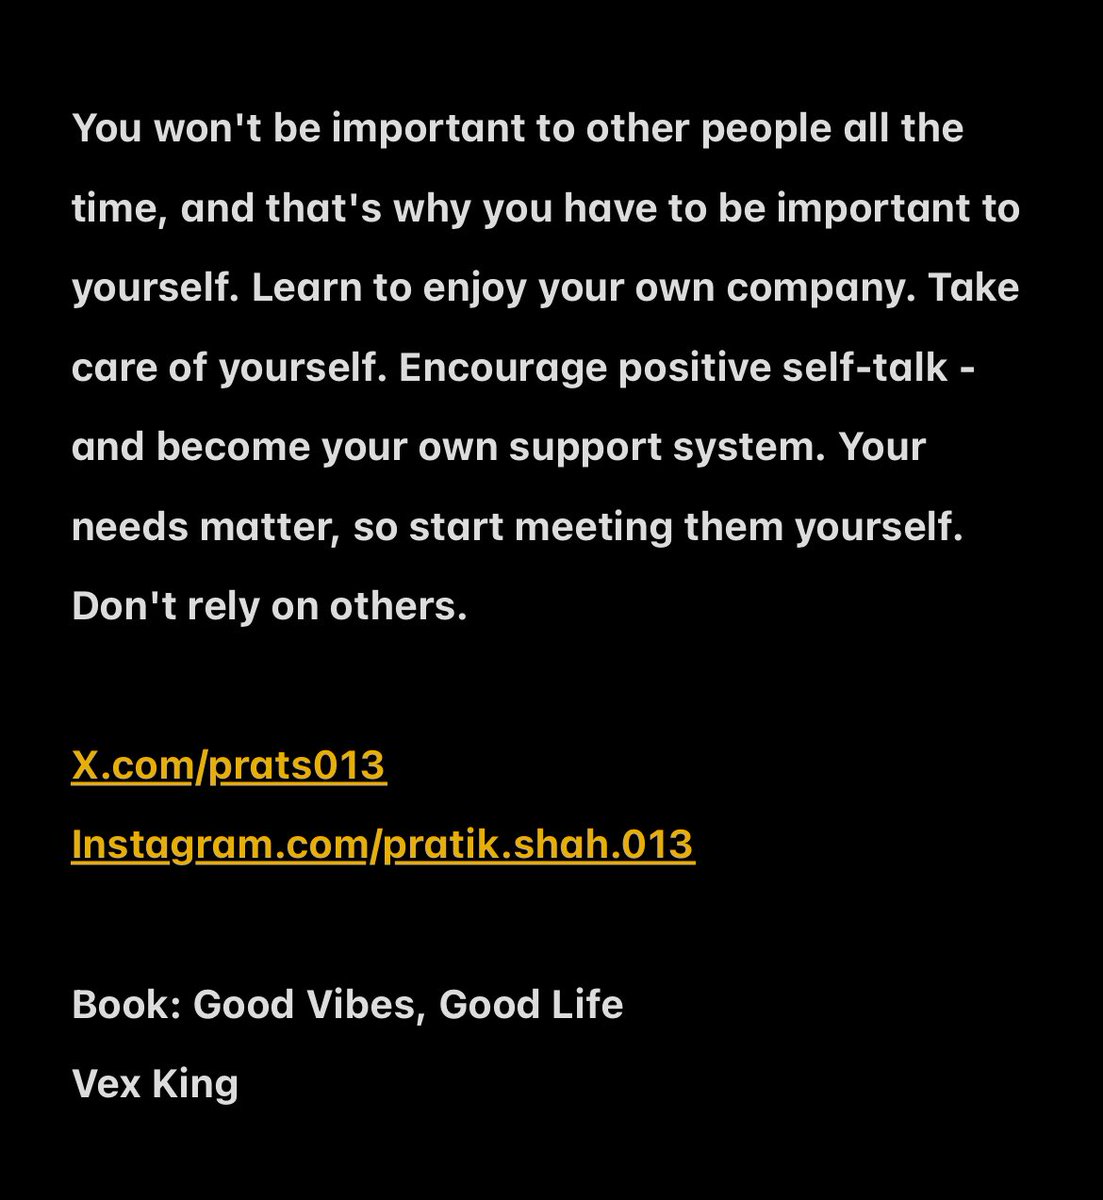 #vexwwksingbook #goodvibesgoodlife #books #readingtime #reading #library #wisdom #learning #knowledge #important #other #people #time #learn #enjoy #company #care #yourself   #encourage #positive #own #support #system #meeting #saturdayreading #weekendreads #weekendfun